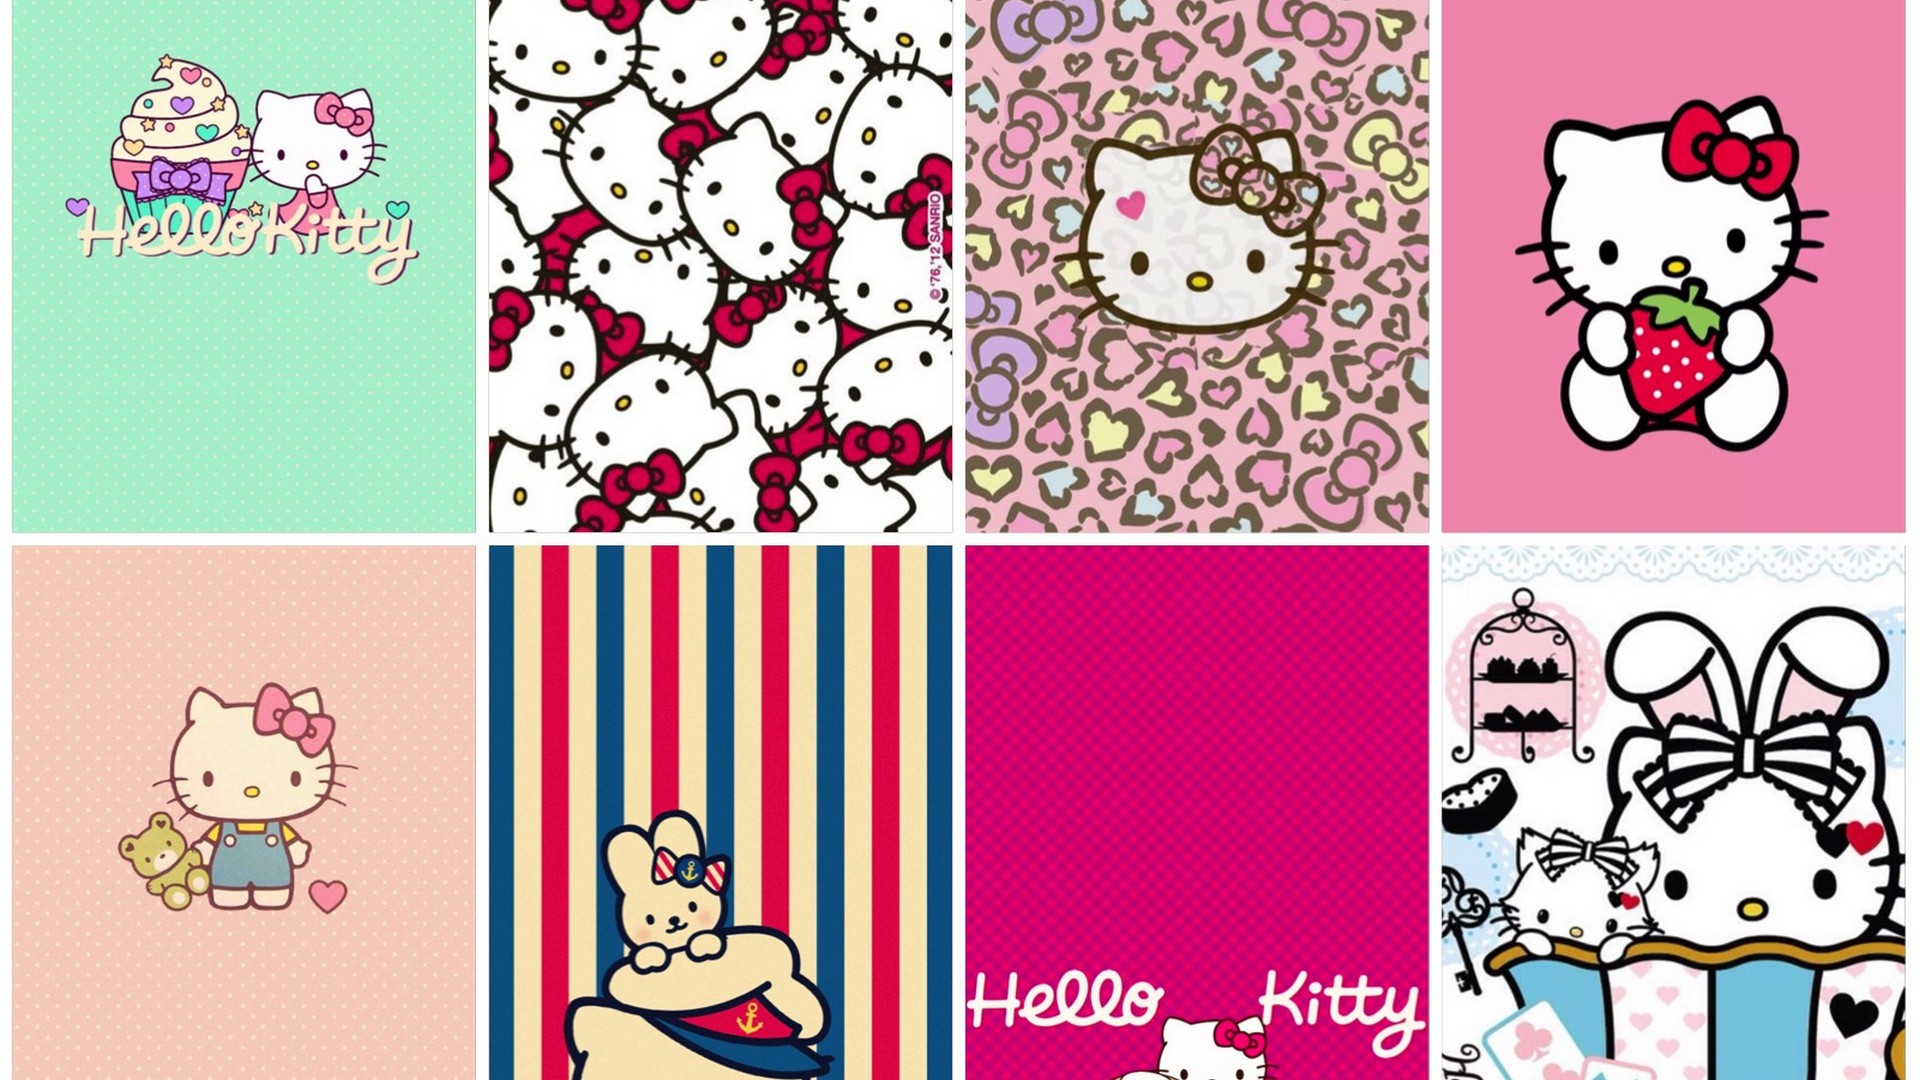 Hello Kitty Characters HD Wallpaper With Resolution 1920X1080 pixel. You can make this wallpaper for your Desktop Computer Backgrounds, Mac Wallpapers, Android Lock screen or iPhone Screensavers